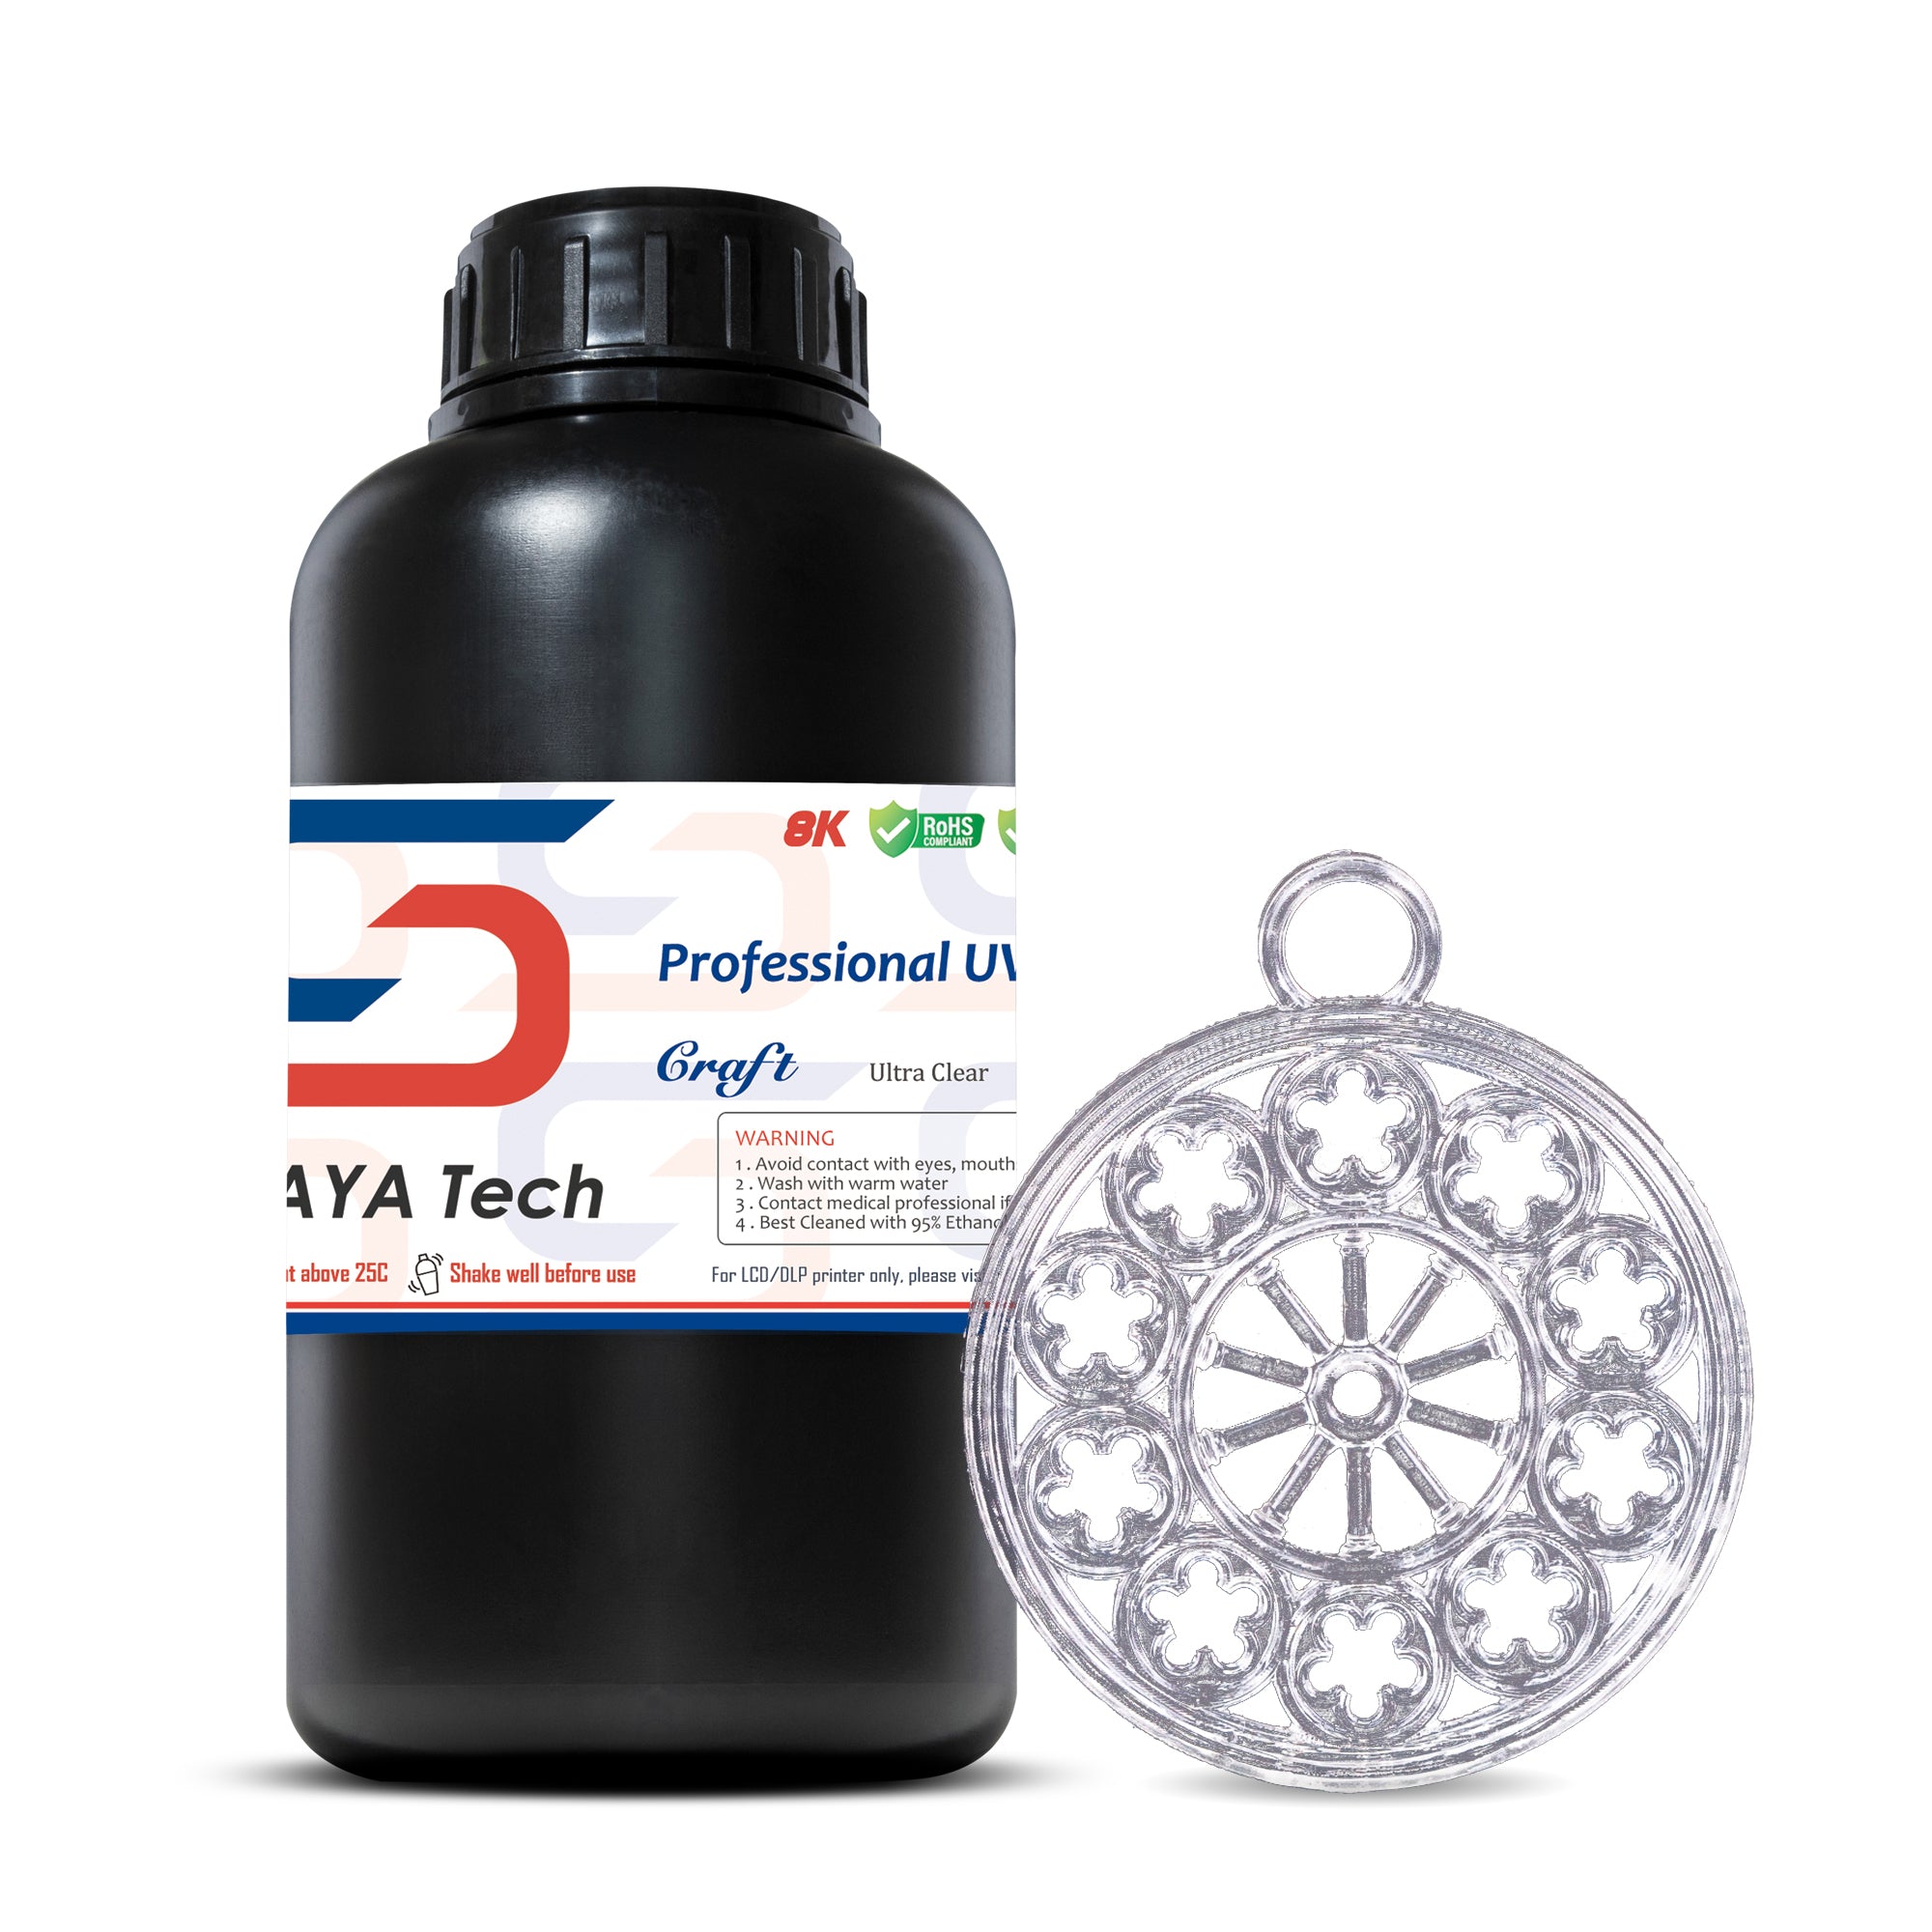 Craft Ultra Clear by Siraya Tech (1kg for US)